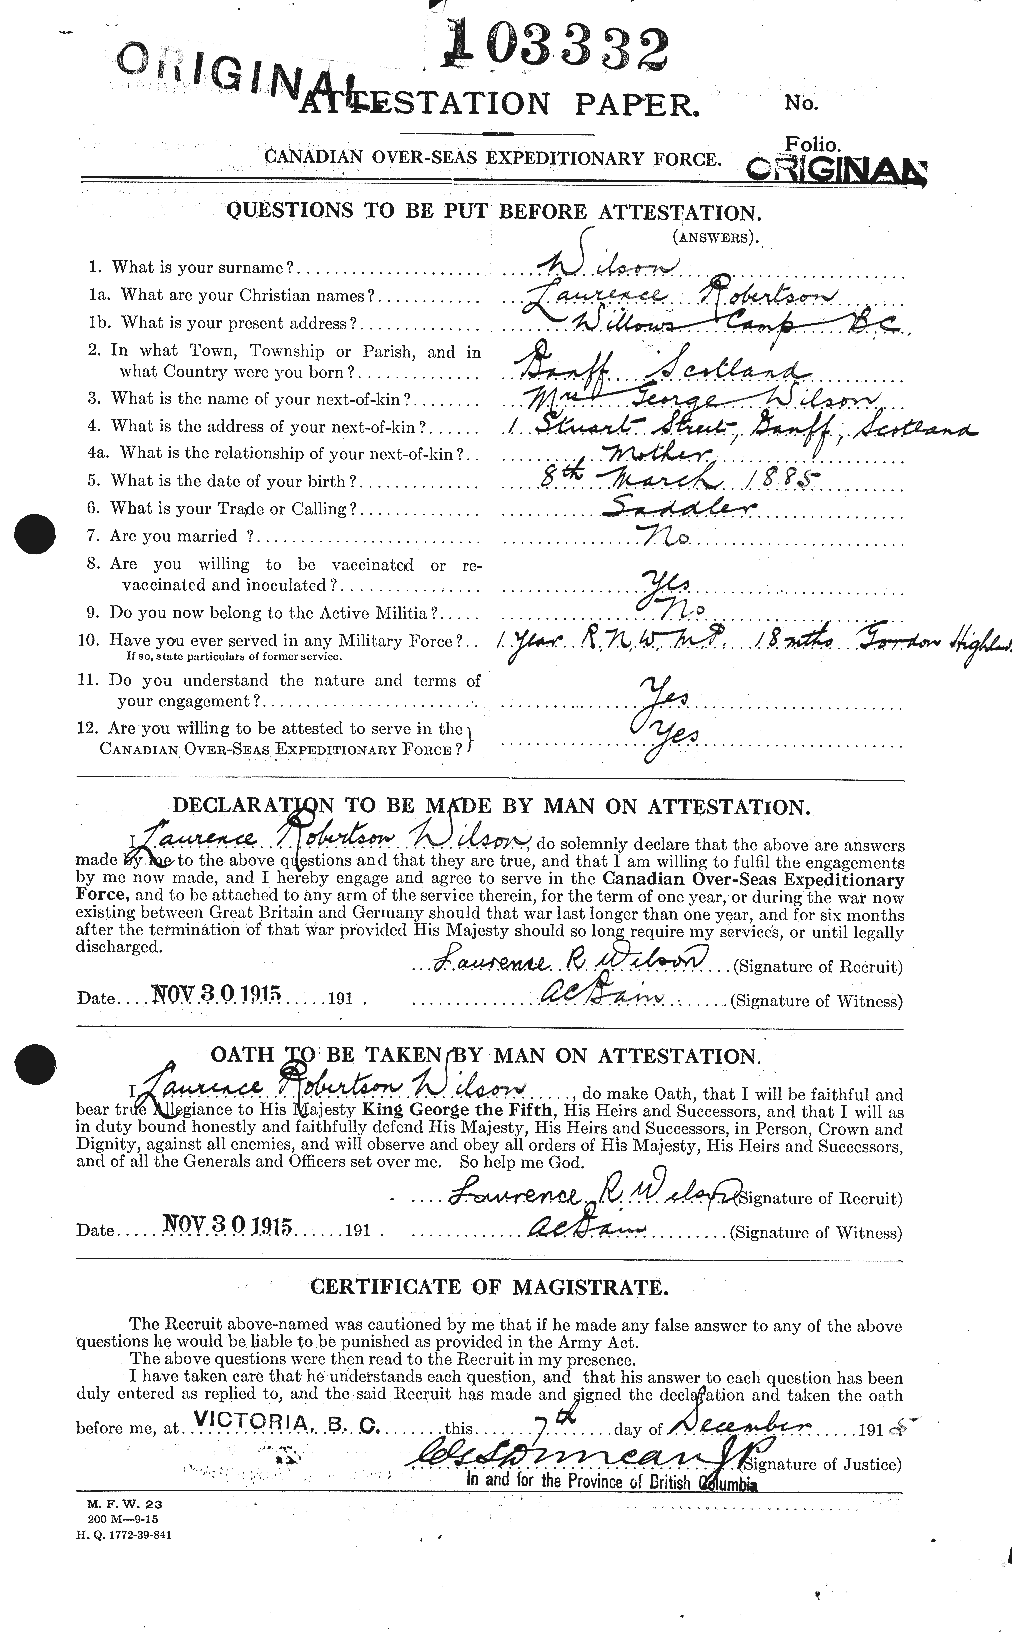 Personnel Records of the First World War - CEF 678617a